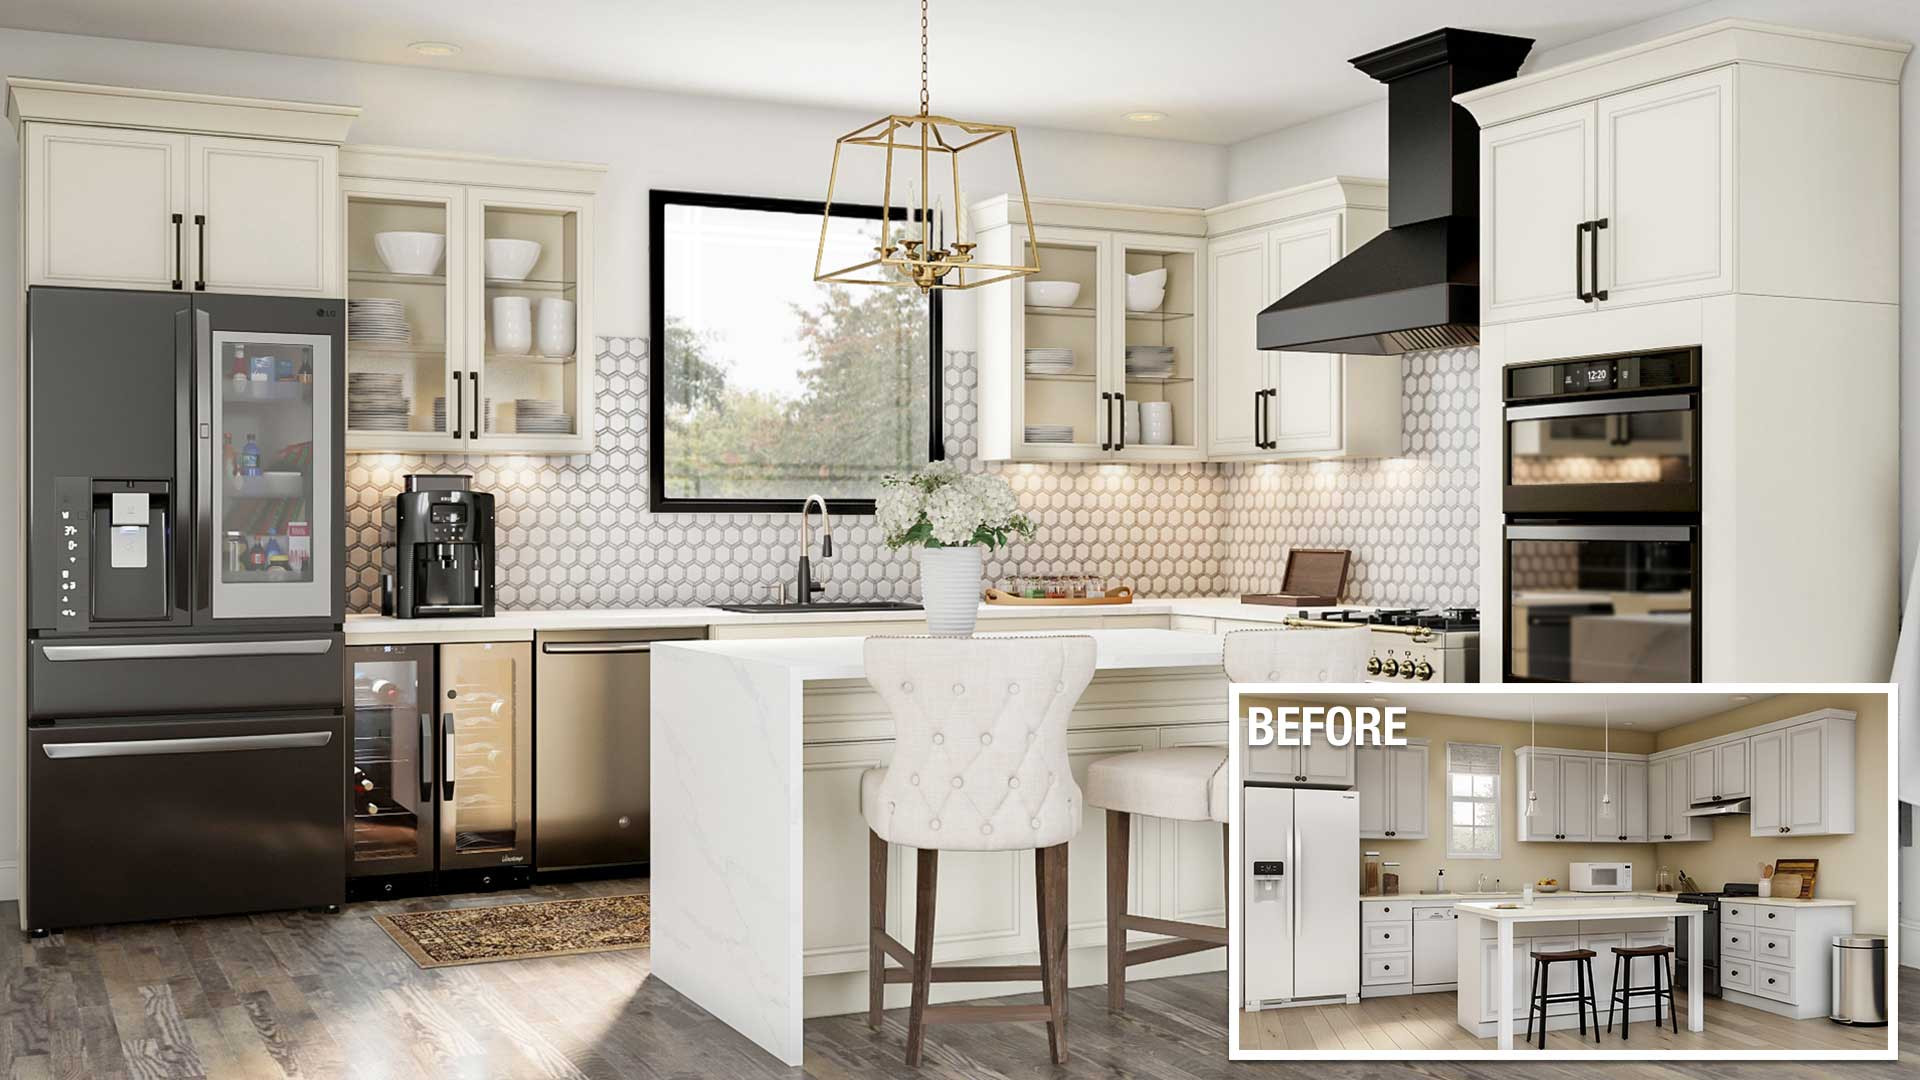 Cost Of Small Kitchen Remodel
 Cost to Remodel a Kitchen The Home Depot